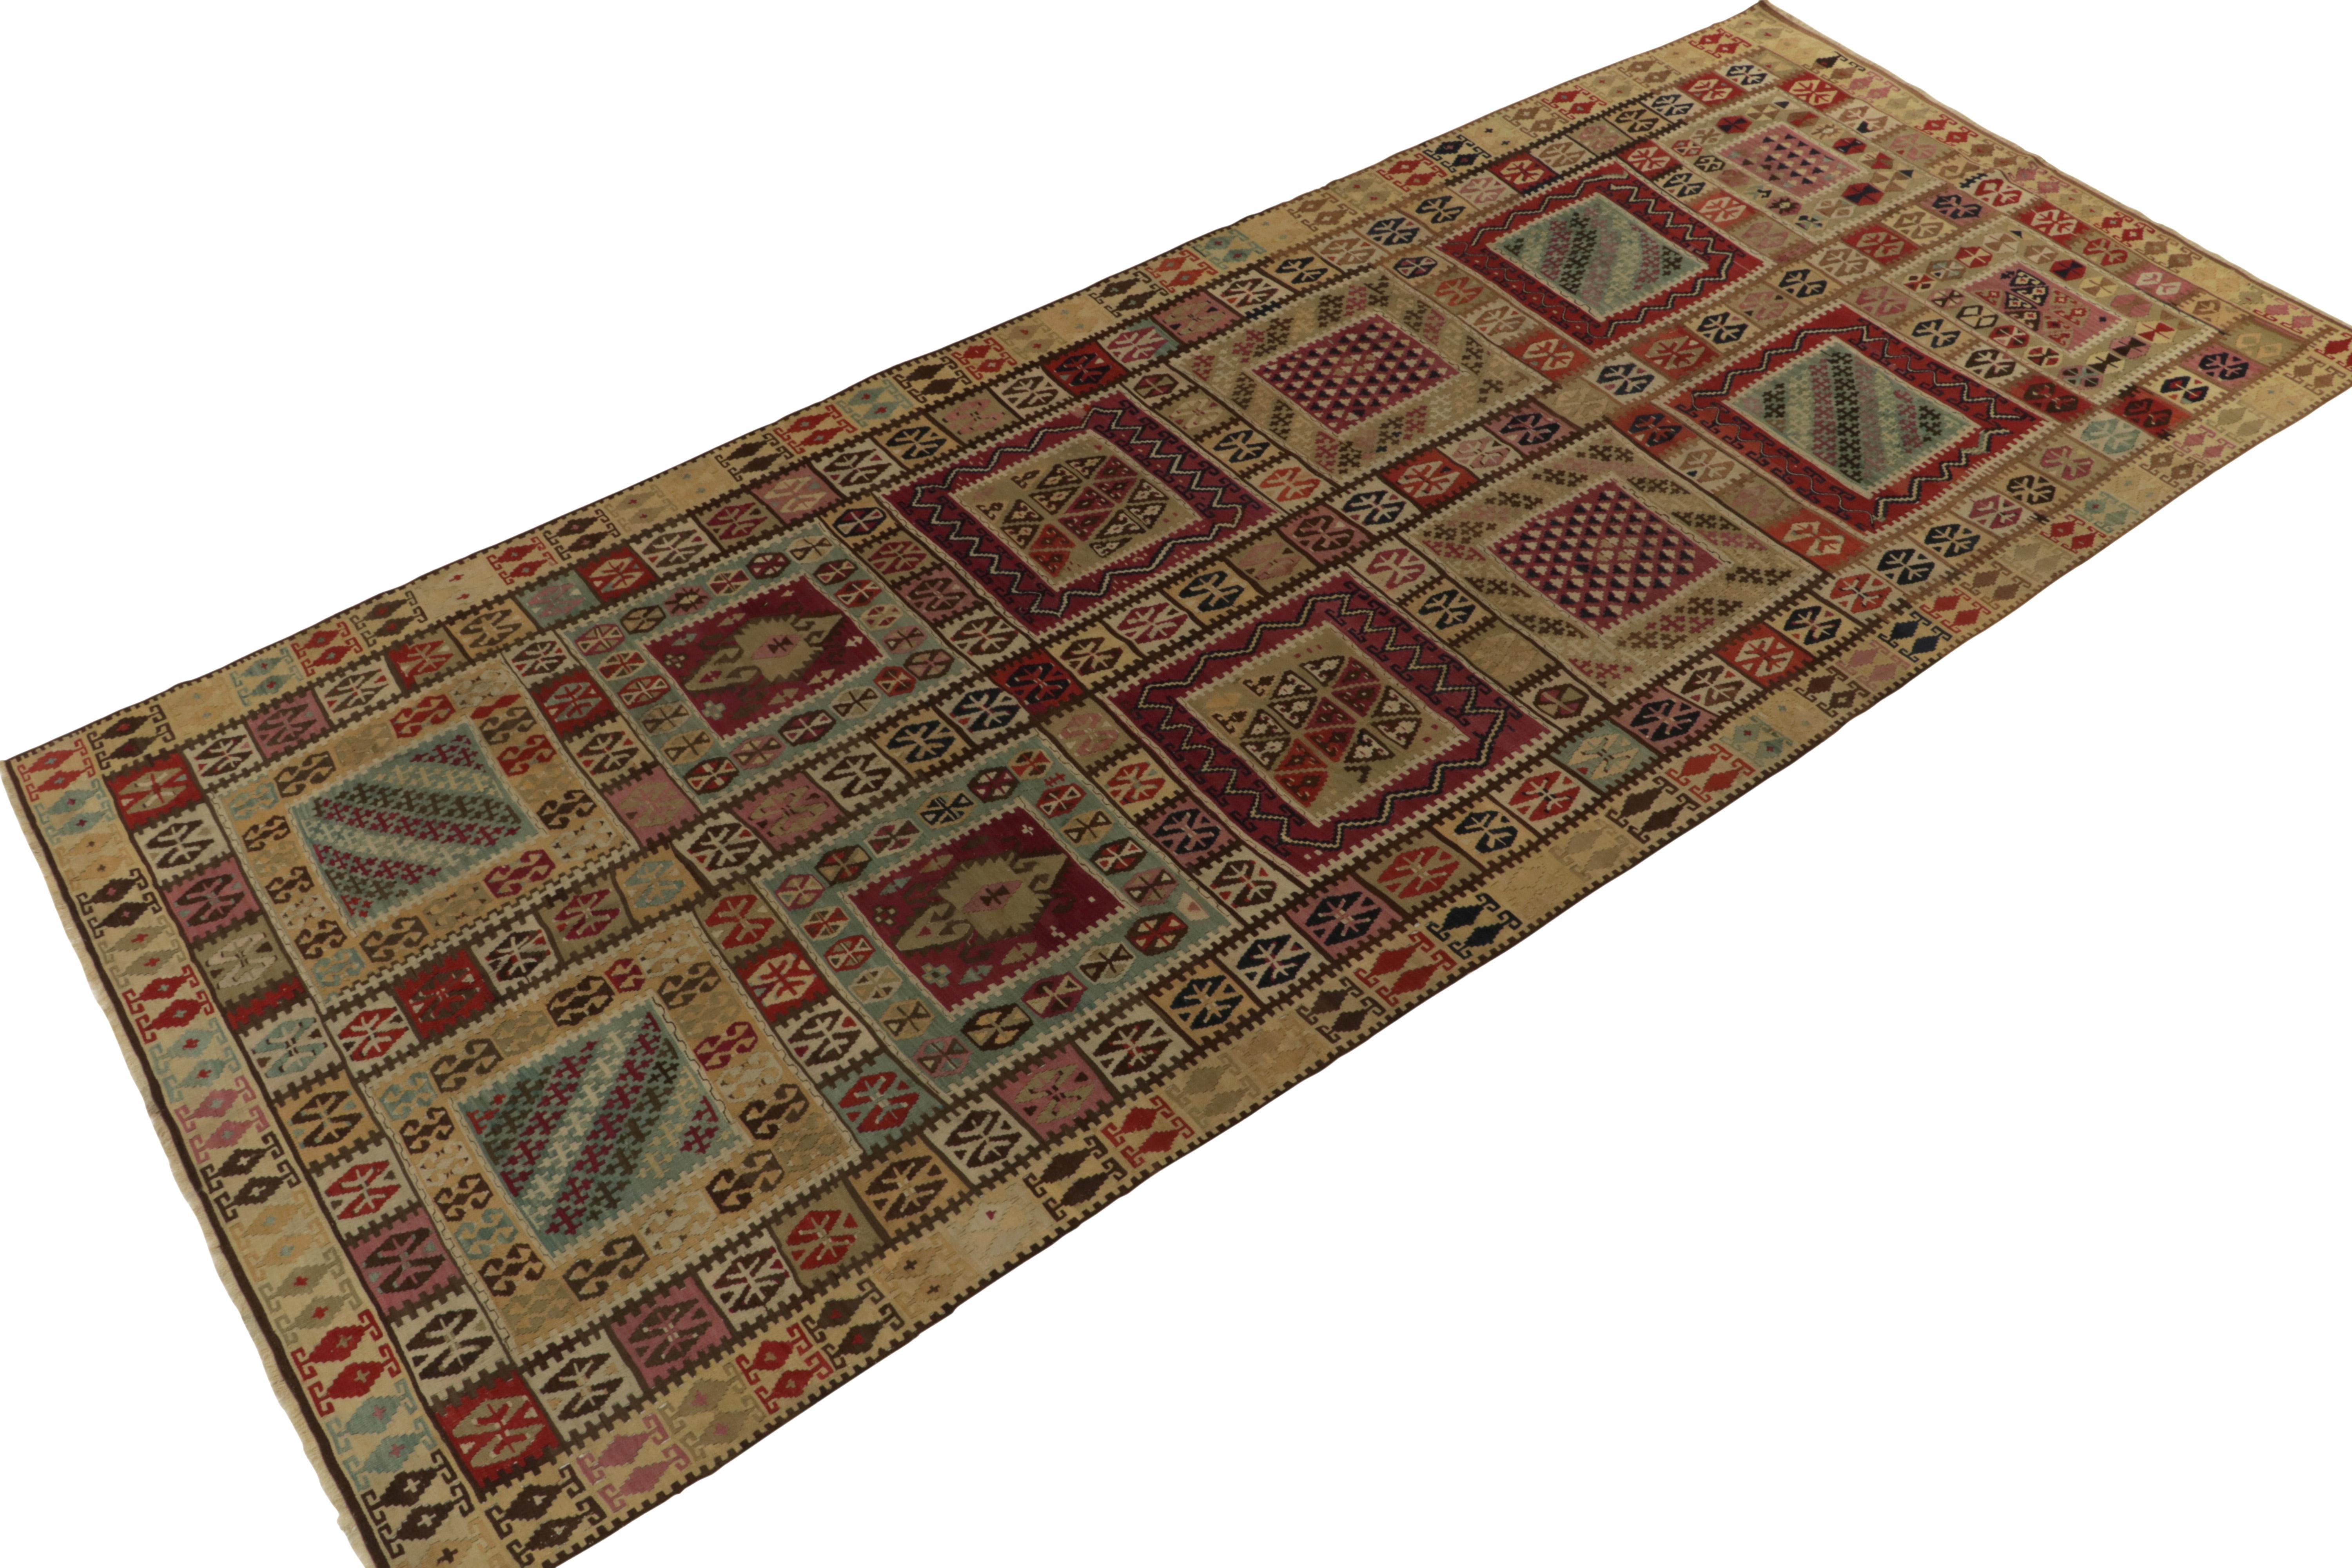 Originating between 1950-1960, a 6x14 vintage mid-century kilim believed to hail from the Sivas province of Turkey. 

Handwoven in wool, the meticulous attention to color variation in this piece stands alone among Sarkisla-native pieces, seldom